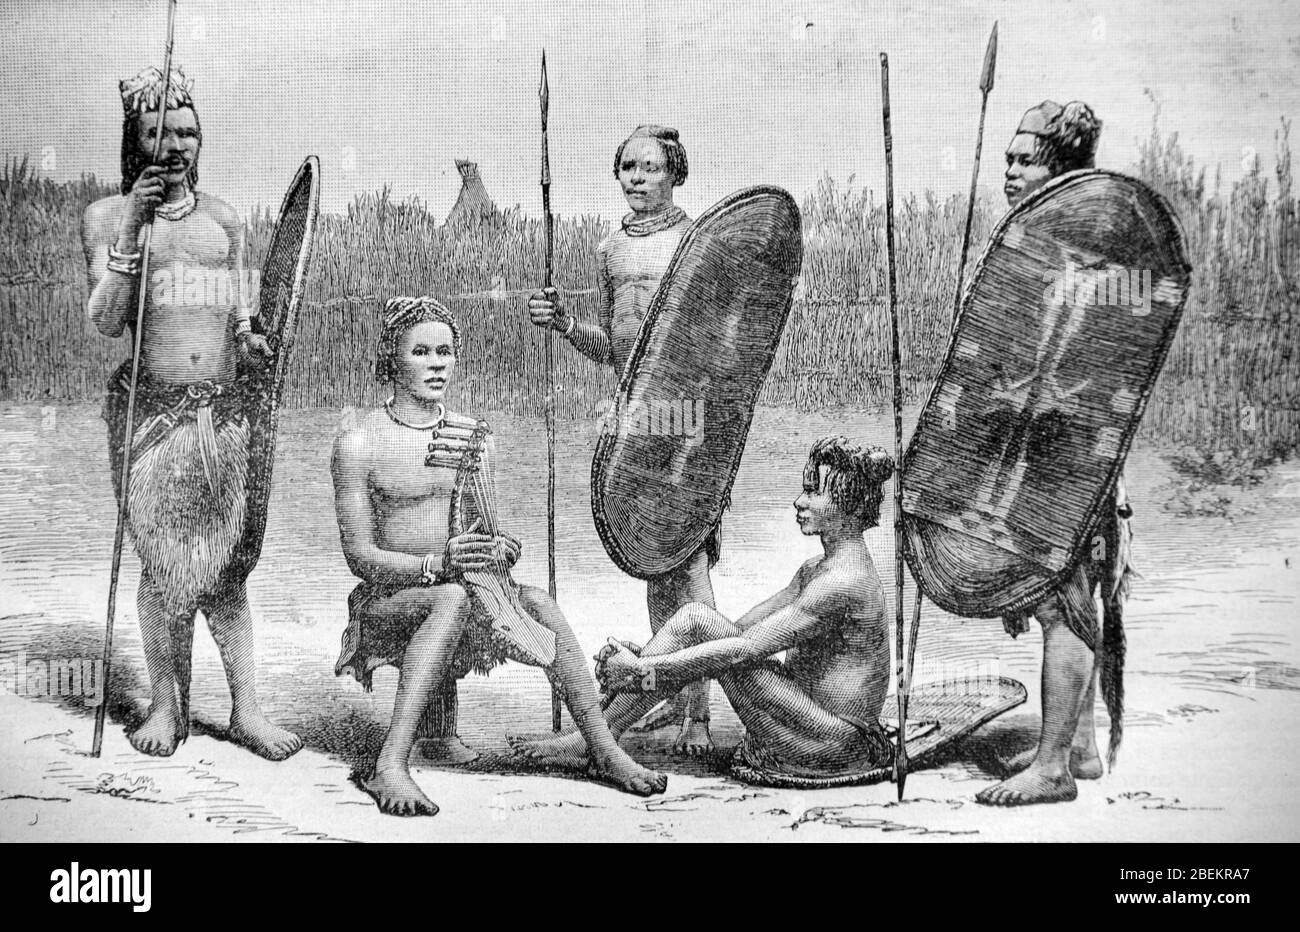 Niam-niam or nyam-nyam Warriors with Shields and Spears, now the   Zande People or Azande, an Ethnic Group of North Central Africa including parts of Congo, South Sudan and the Central African Republic. Vintage or Old Illustration or Engraving 1887. Stock Photo